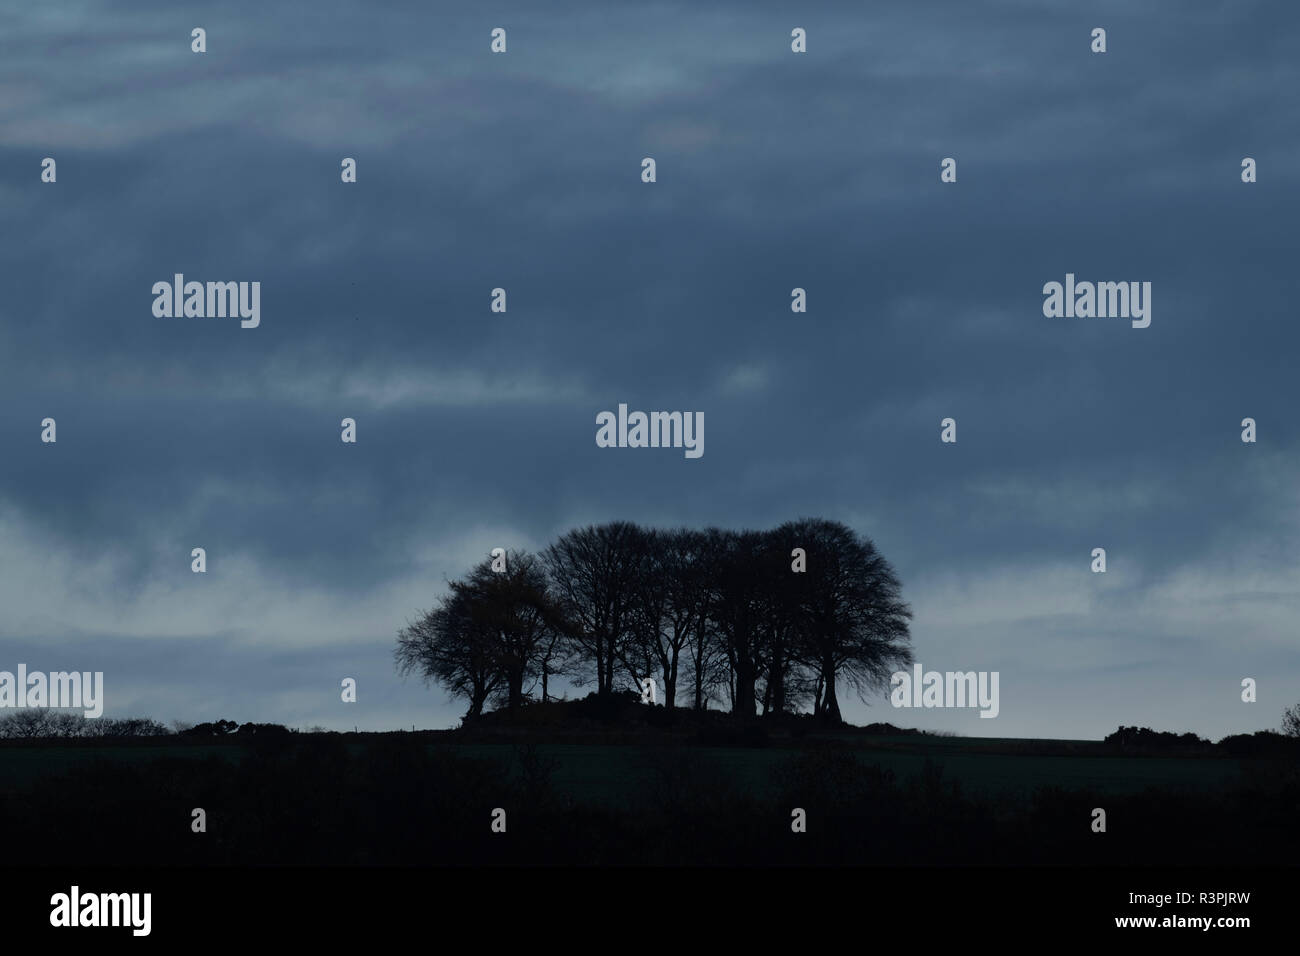 A Group of Trees Silhouetted Against a Cloudy Sky at Daybreak Stock Photo